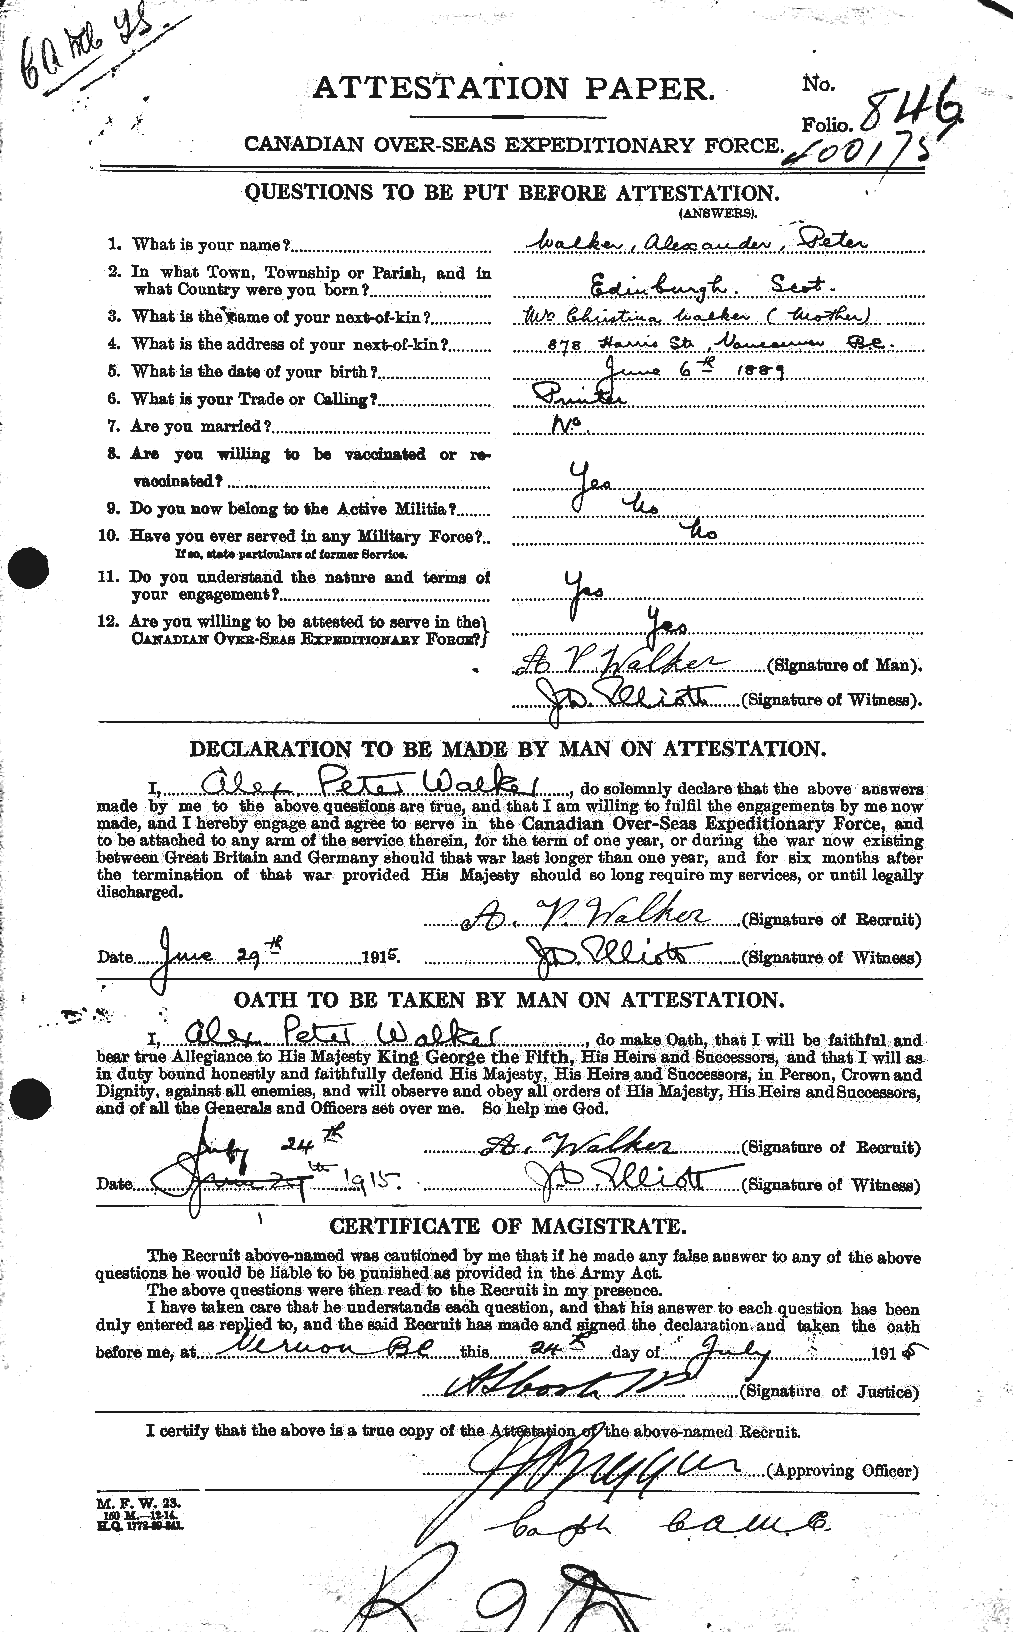 Personnel Records of the First World War - CEF 651028a